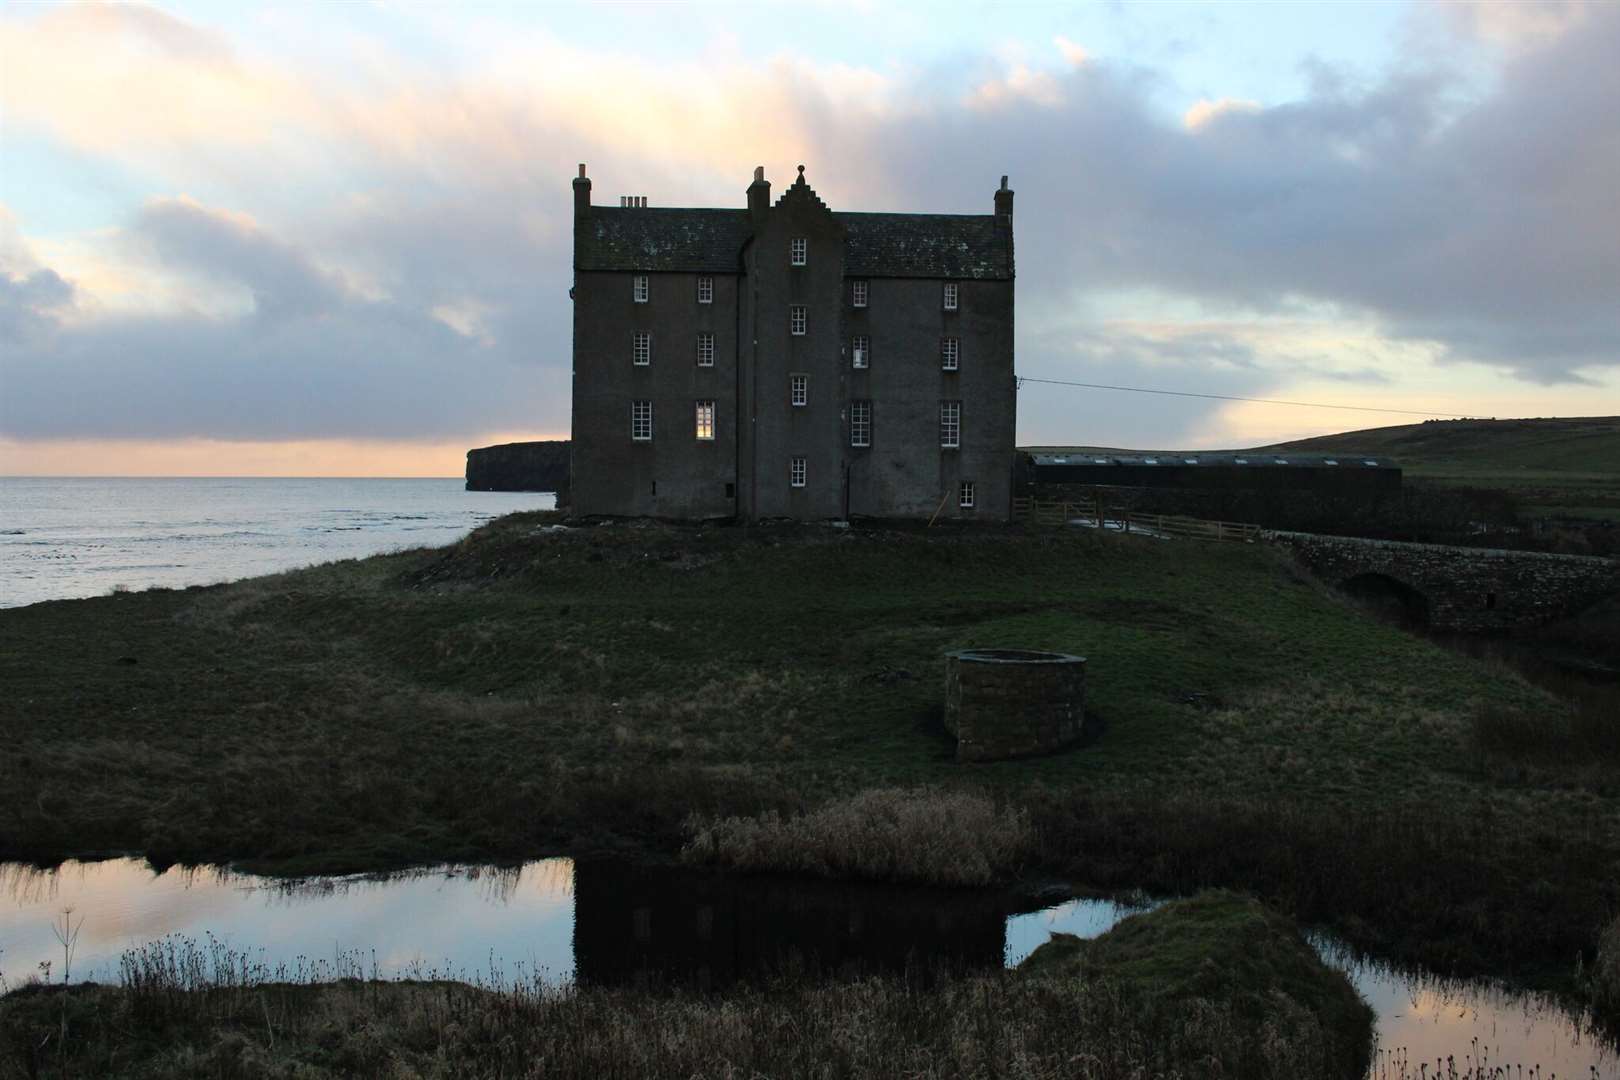 The film is based at Freswick Castle.